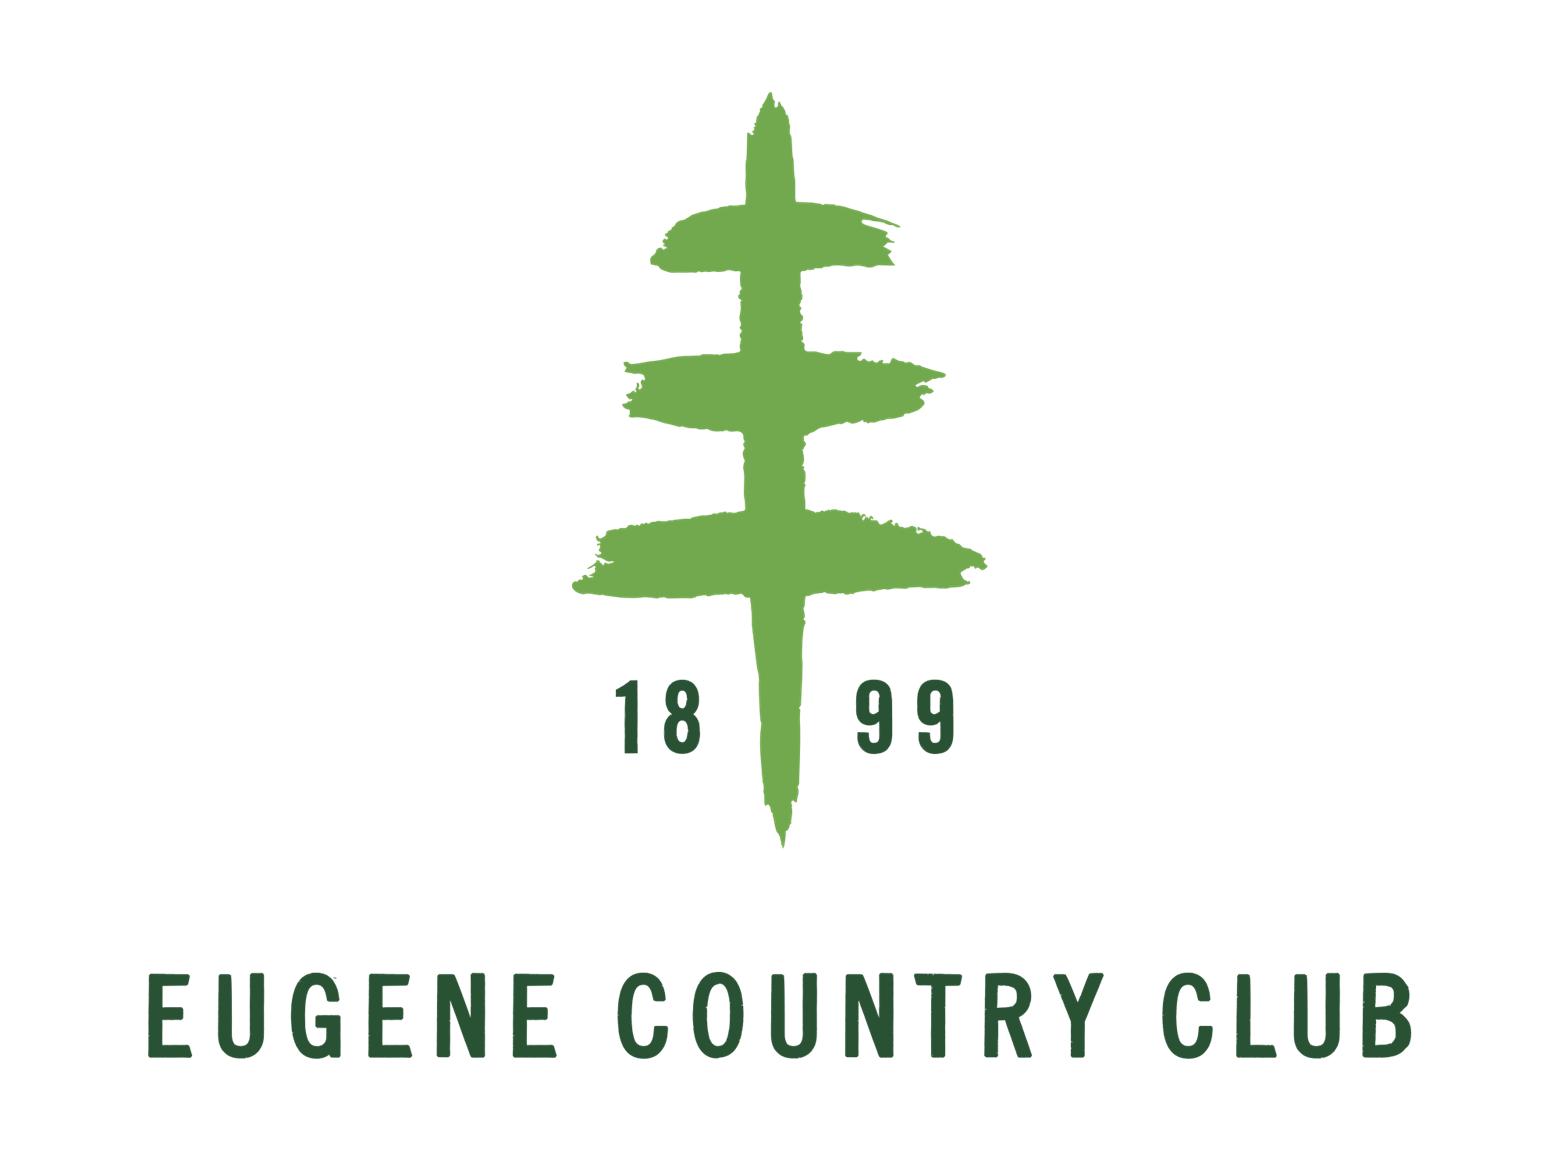 Eugene Country Club: A new clubhouse and a new logo